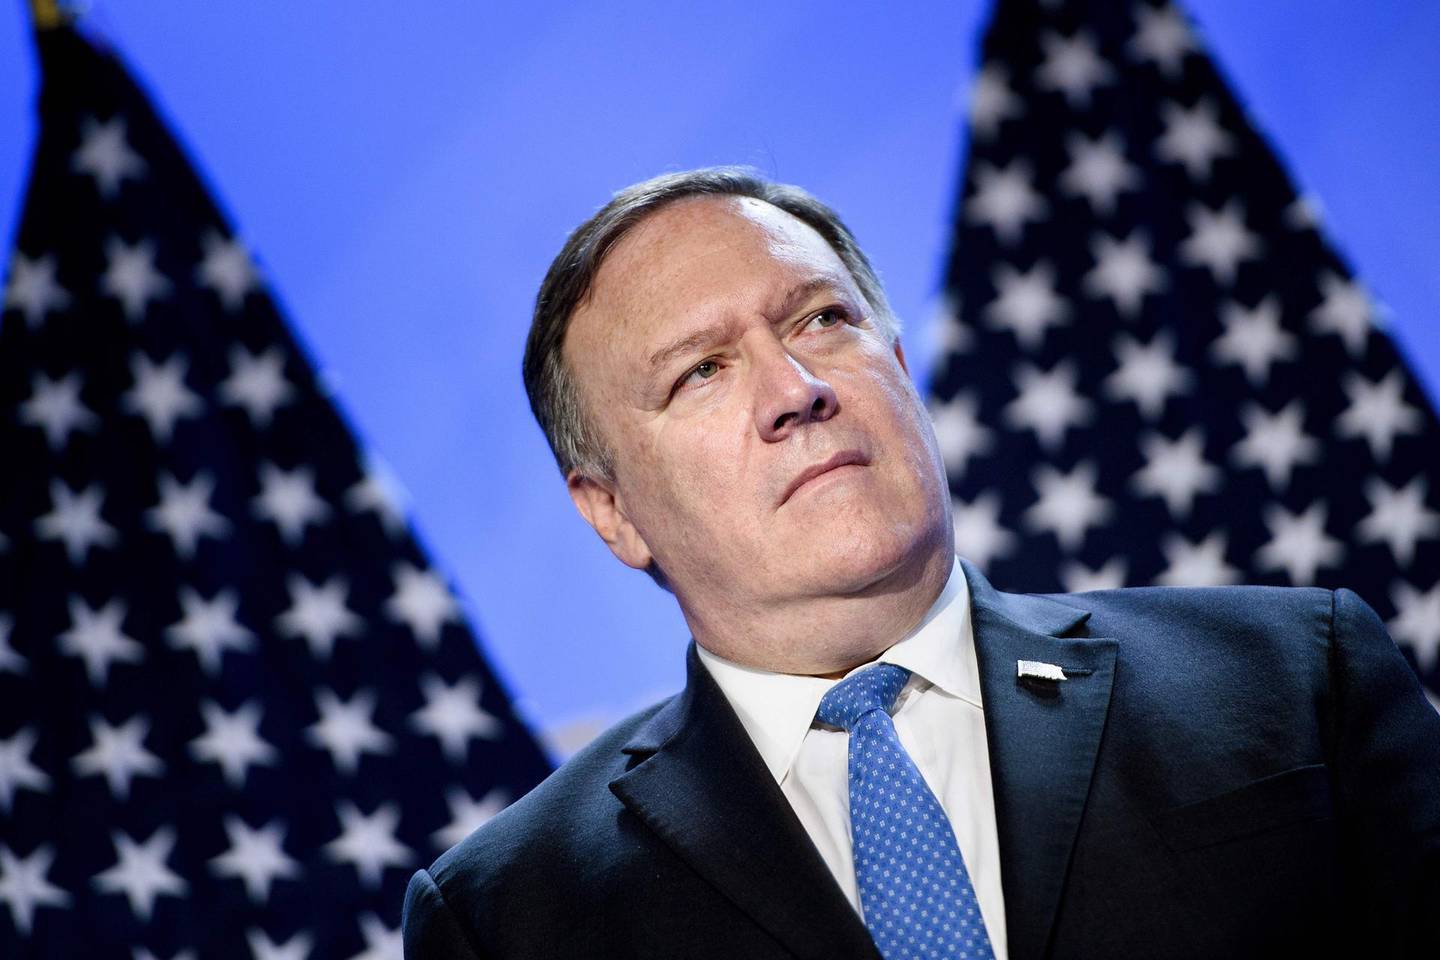 (FILES) In this file photo taken on July 11, 2018 US Secretary of State Mike Pompeo looks on as US President Donald Trump addresses a press conference on the second day of the North Atlantic Treaty Organization (NATO) summit in Brussels. The United States is not "afraid to tackle" Iranian officials with sanctions at the "highest level" of its government, Secretary of State Mike Pompeo said on July 22, 2018. Pompeo also confirmed that Washington wants all countries to reduce their imports of Iranian oil "as close to zero as possible" by November 4, part of US efforts to increase economic pressure on Tehran. / AFP / Brendan Smialowski
